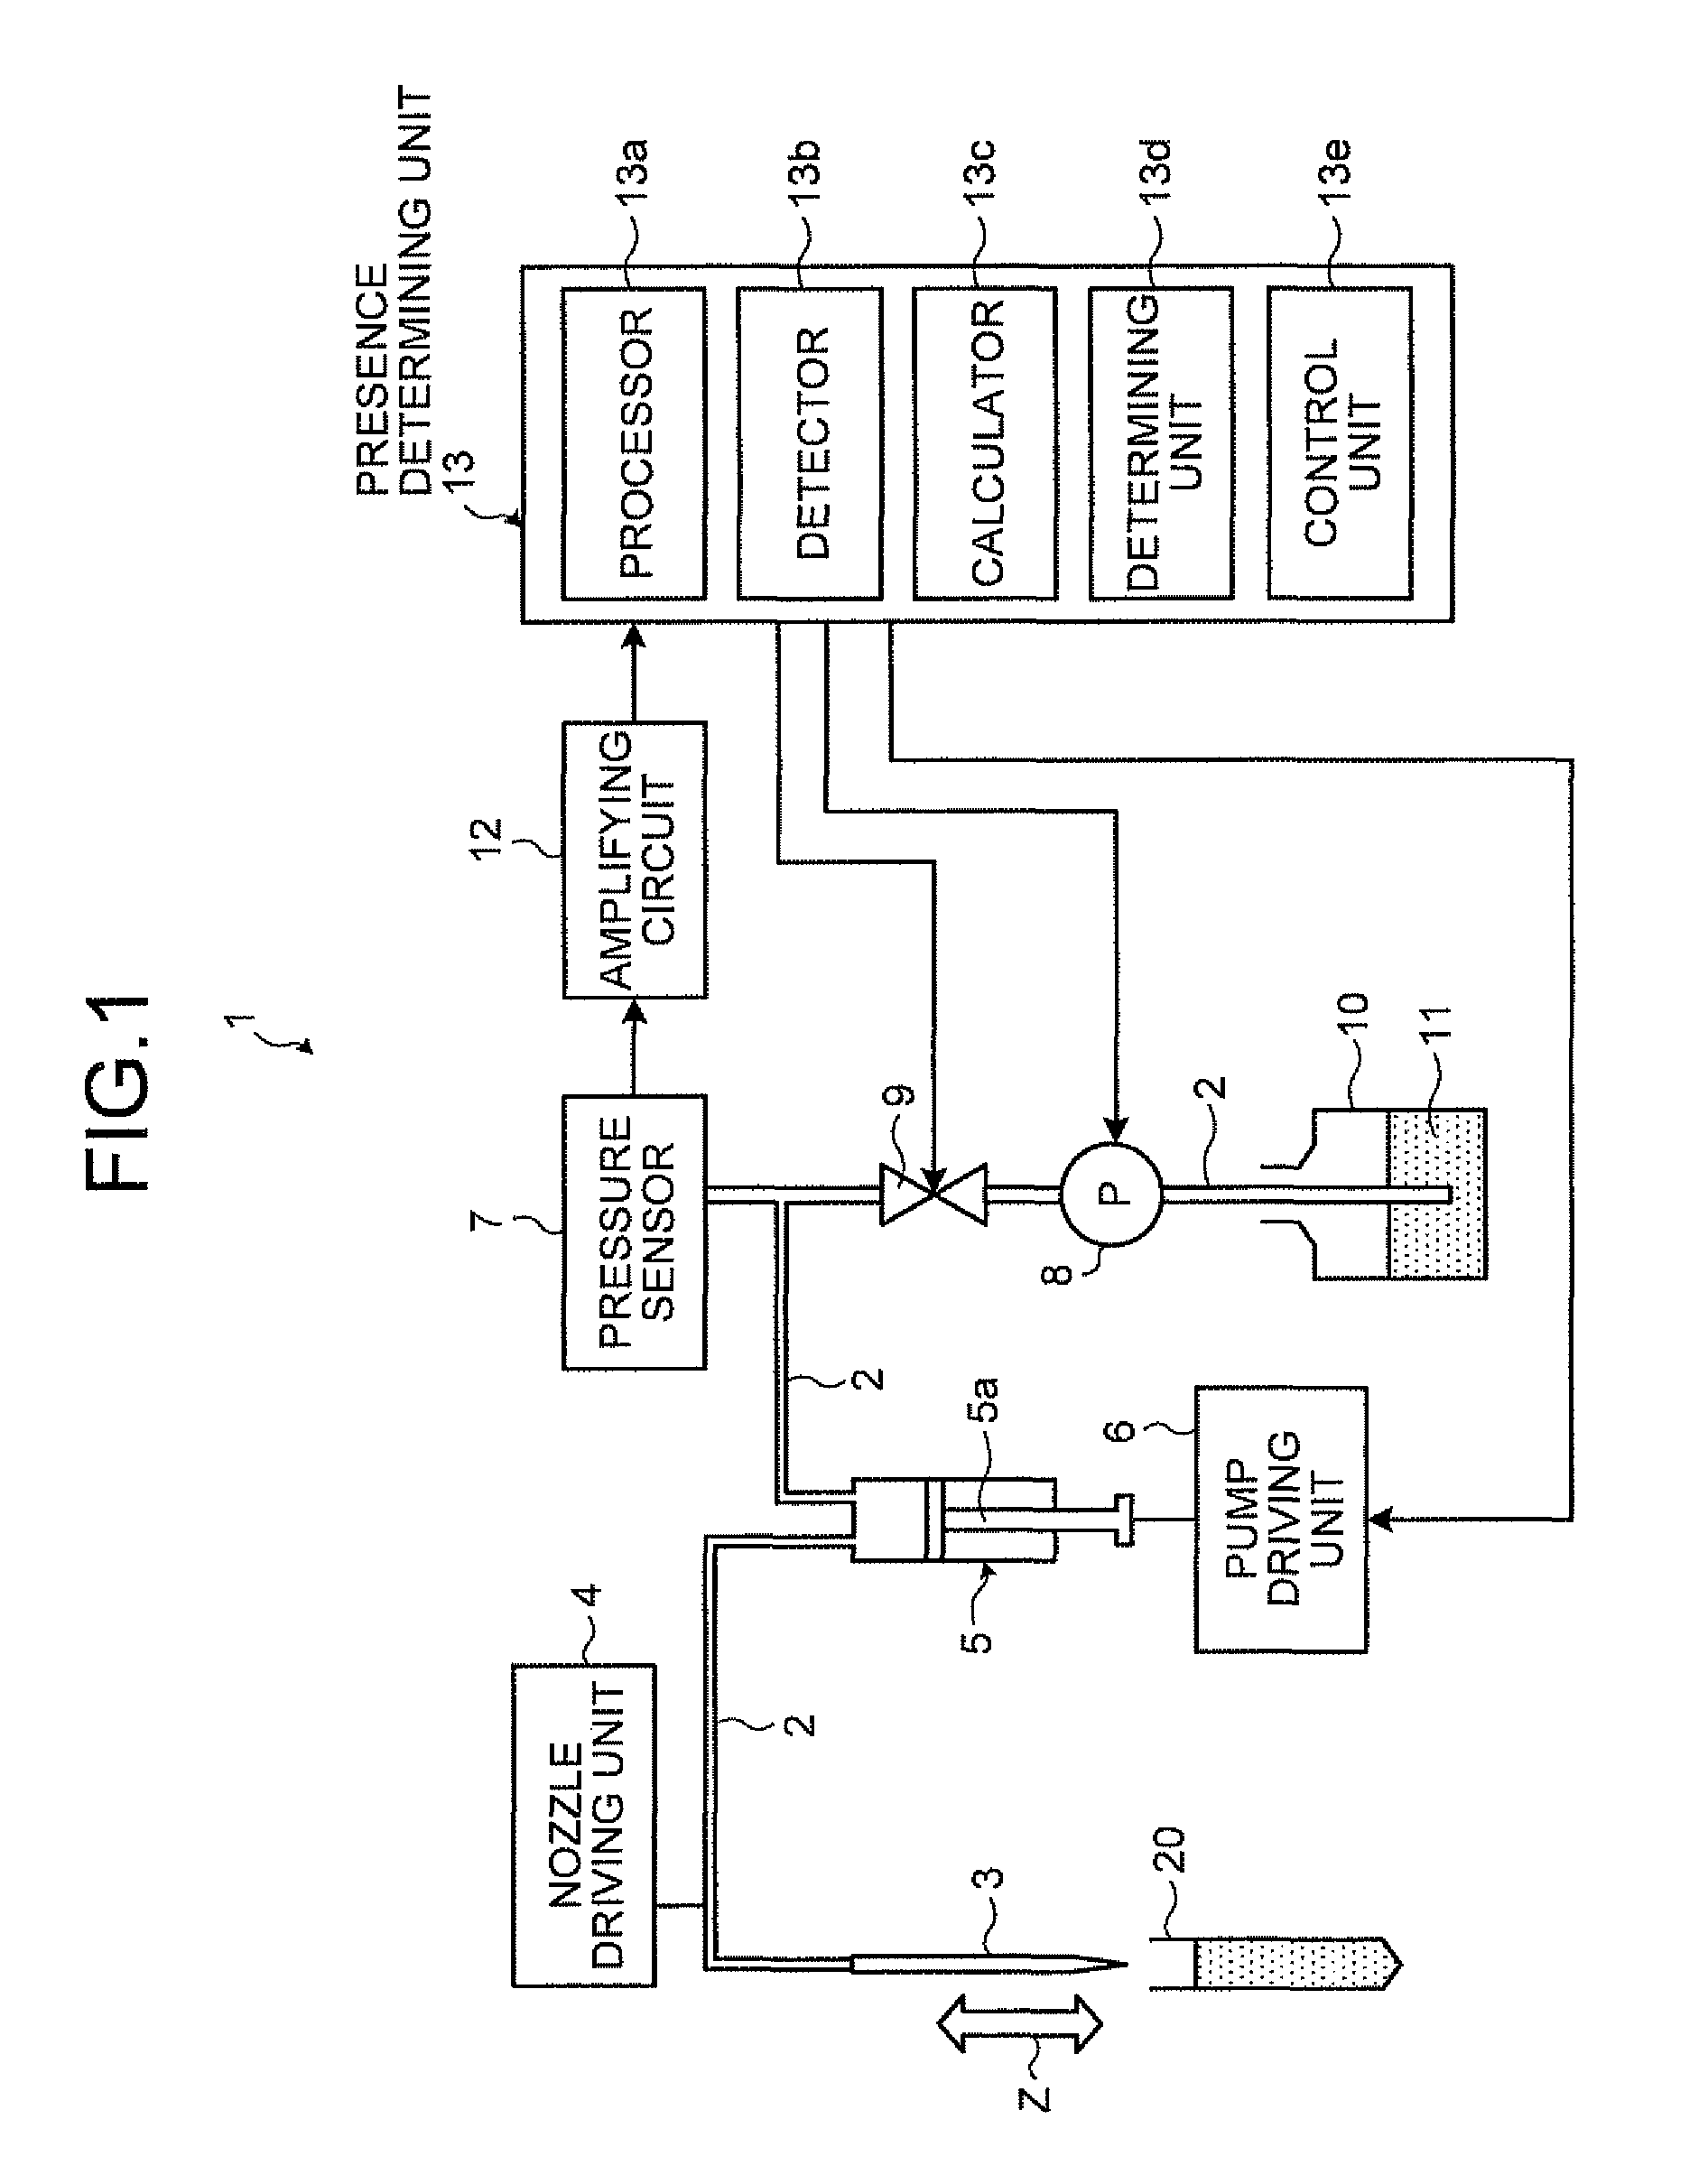 Dispensing apparatus and in-duct bubble presence determining method in the same